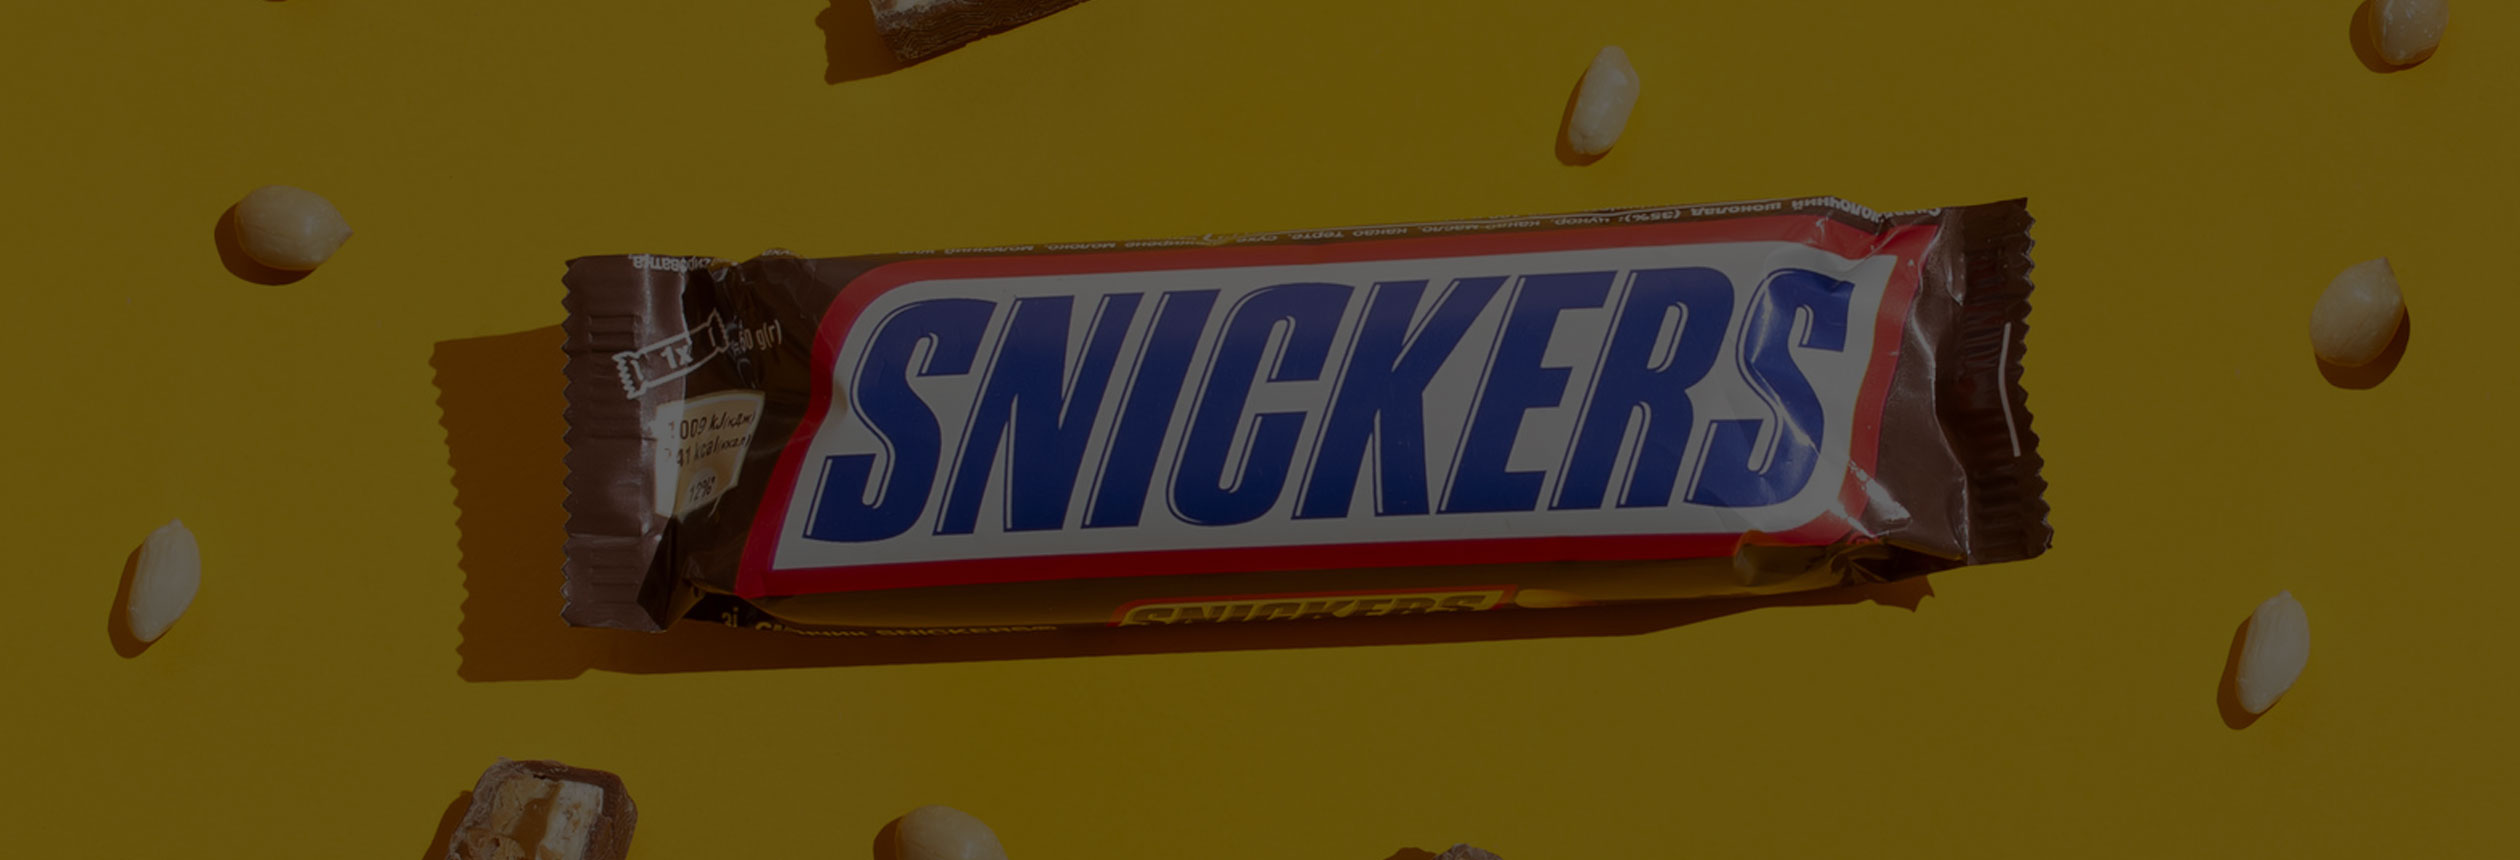 Snickers advertising & branding, The Ostrich effect